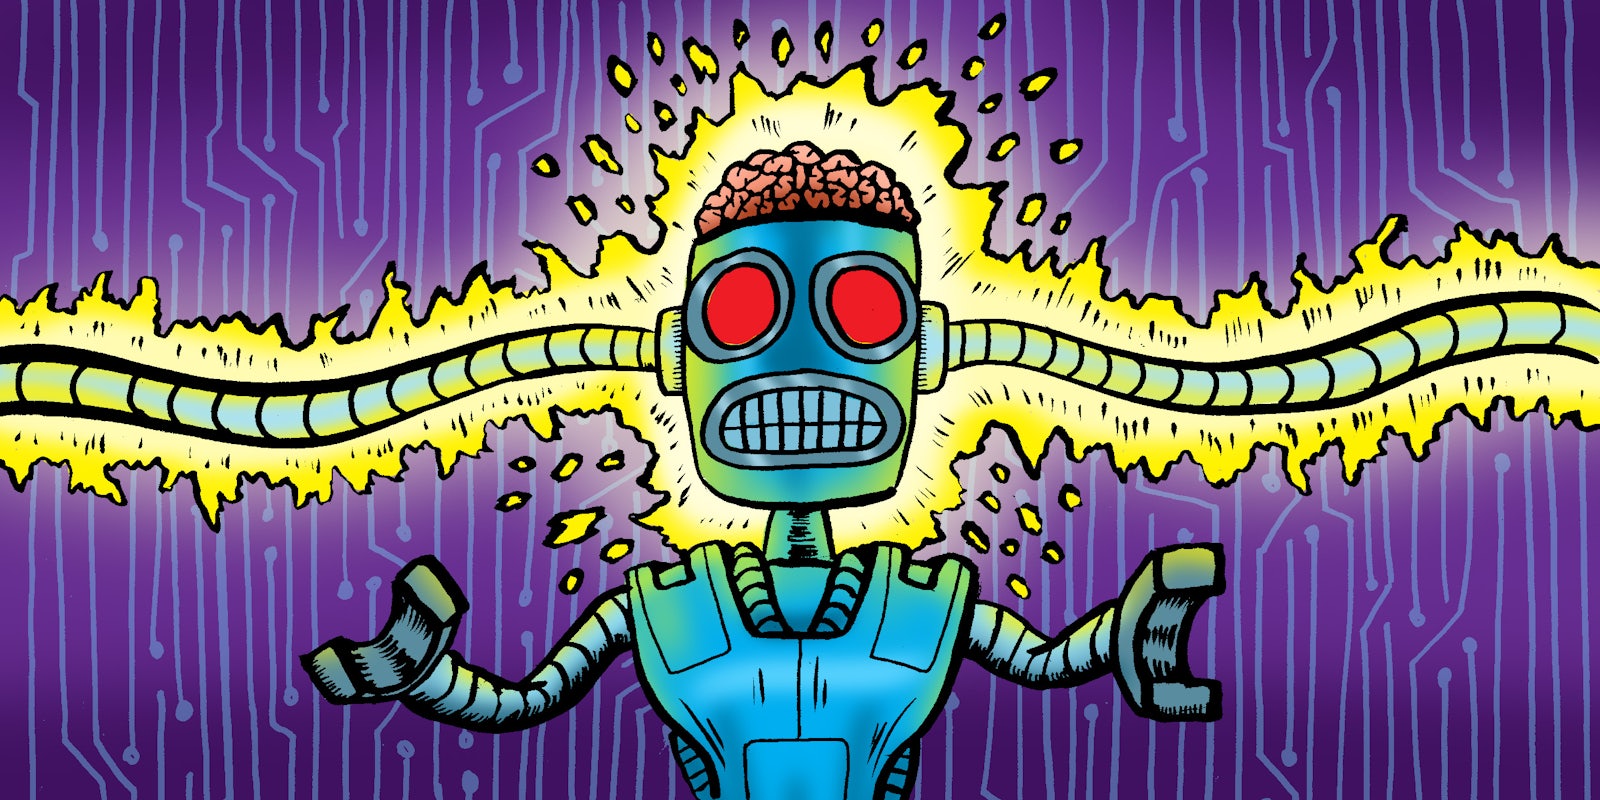 AI robot is getting shocked illustration